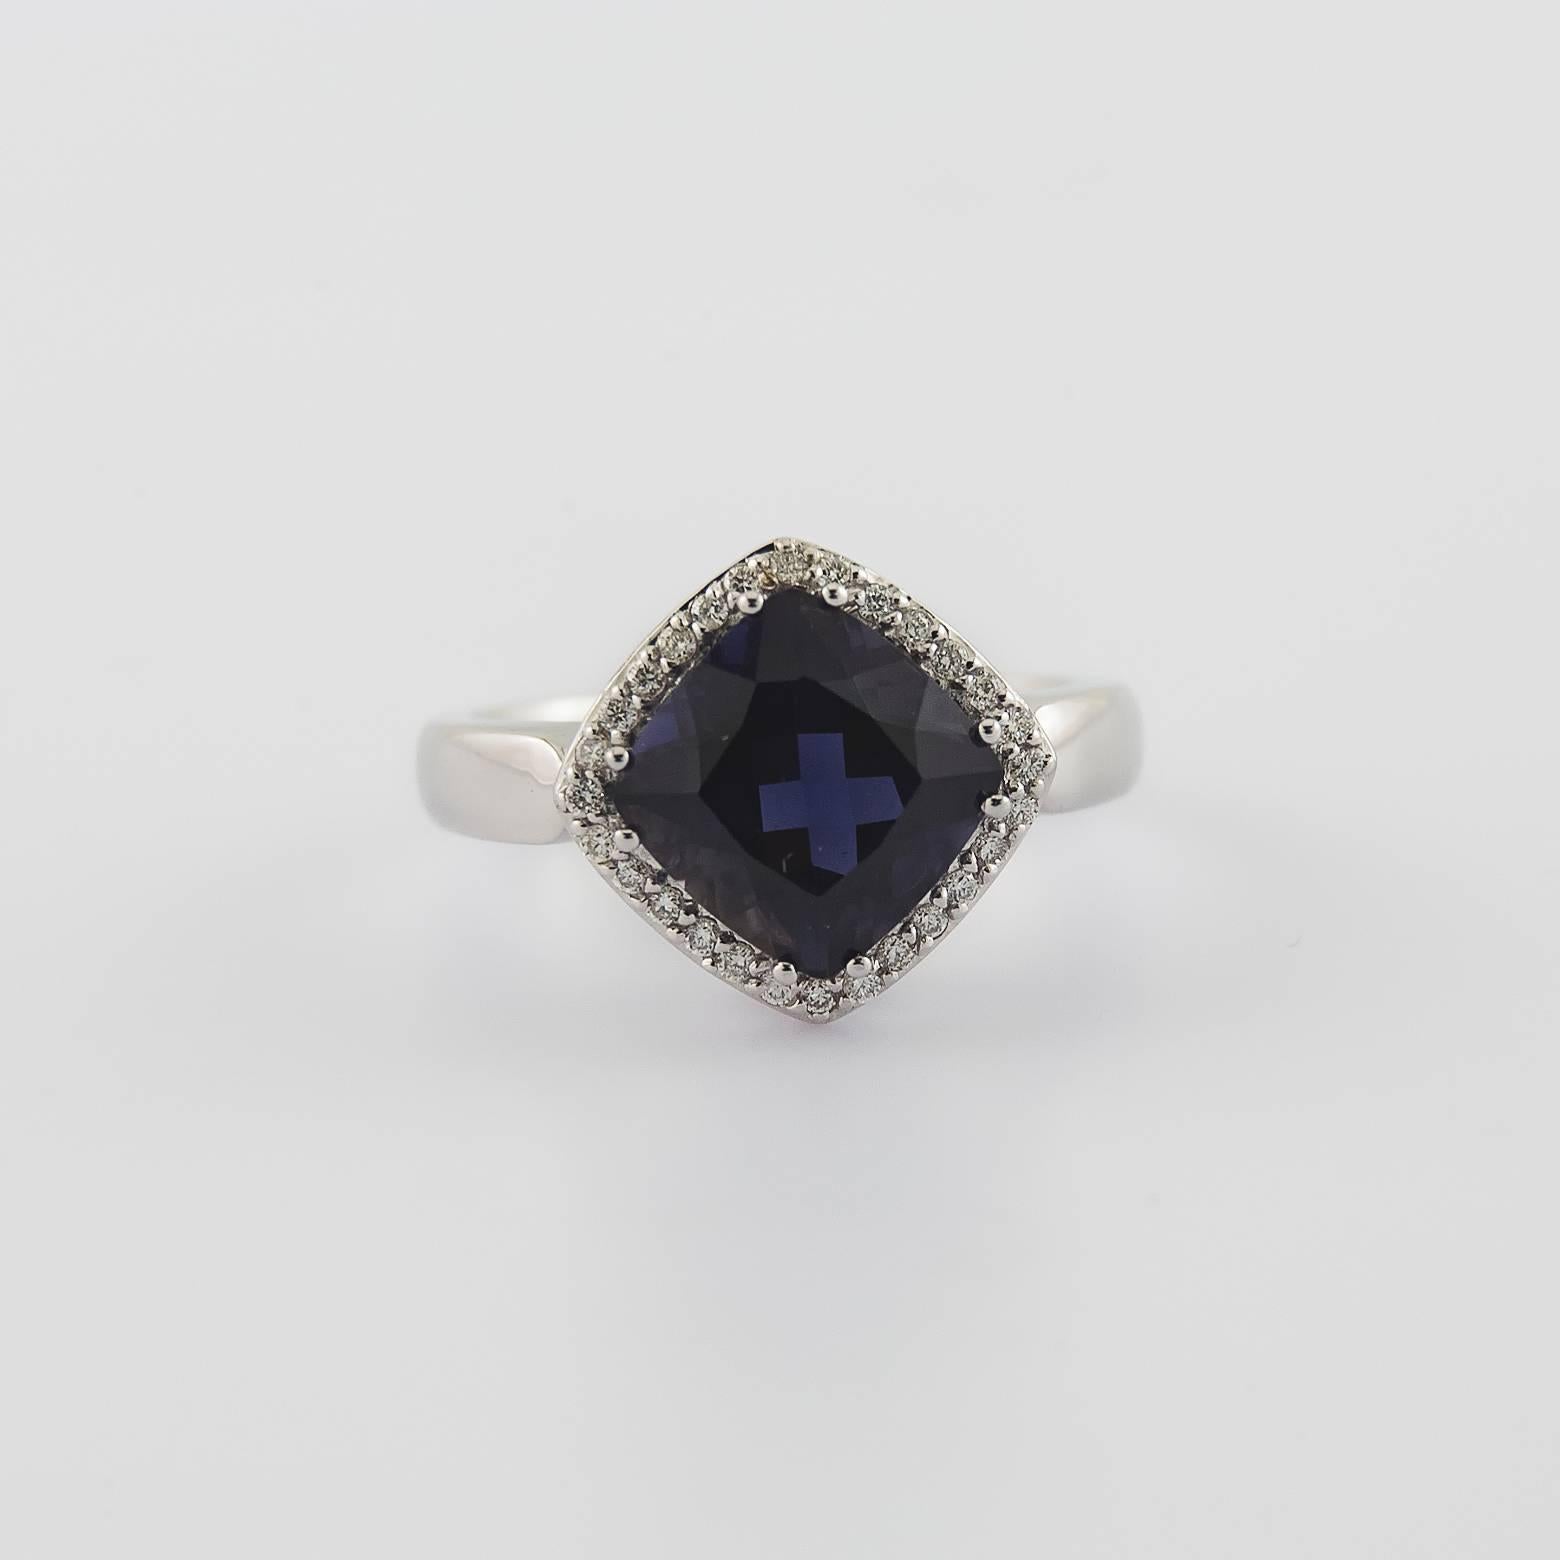 Approximately 4 carats of deep, dark and stunning Iolite bordered with fabulous bright sparkly diamonds. If this Iolite were any darker it would black like the nights sky. It's a statement piece, timeless and its absolutely gorgeous! Just about a